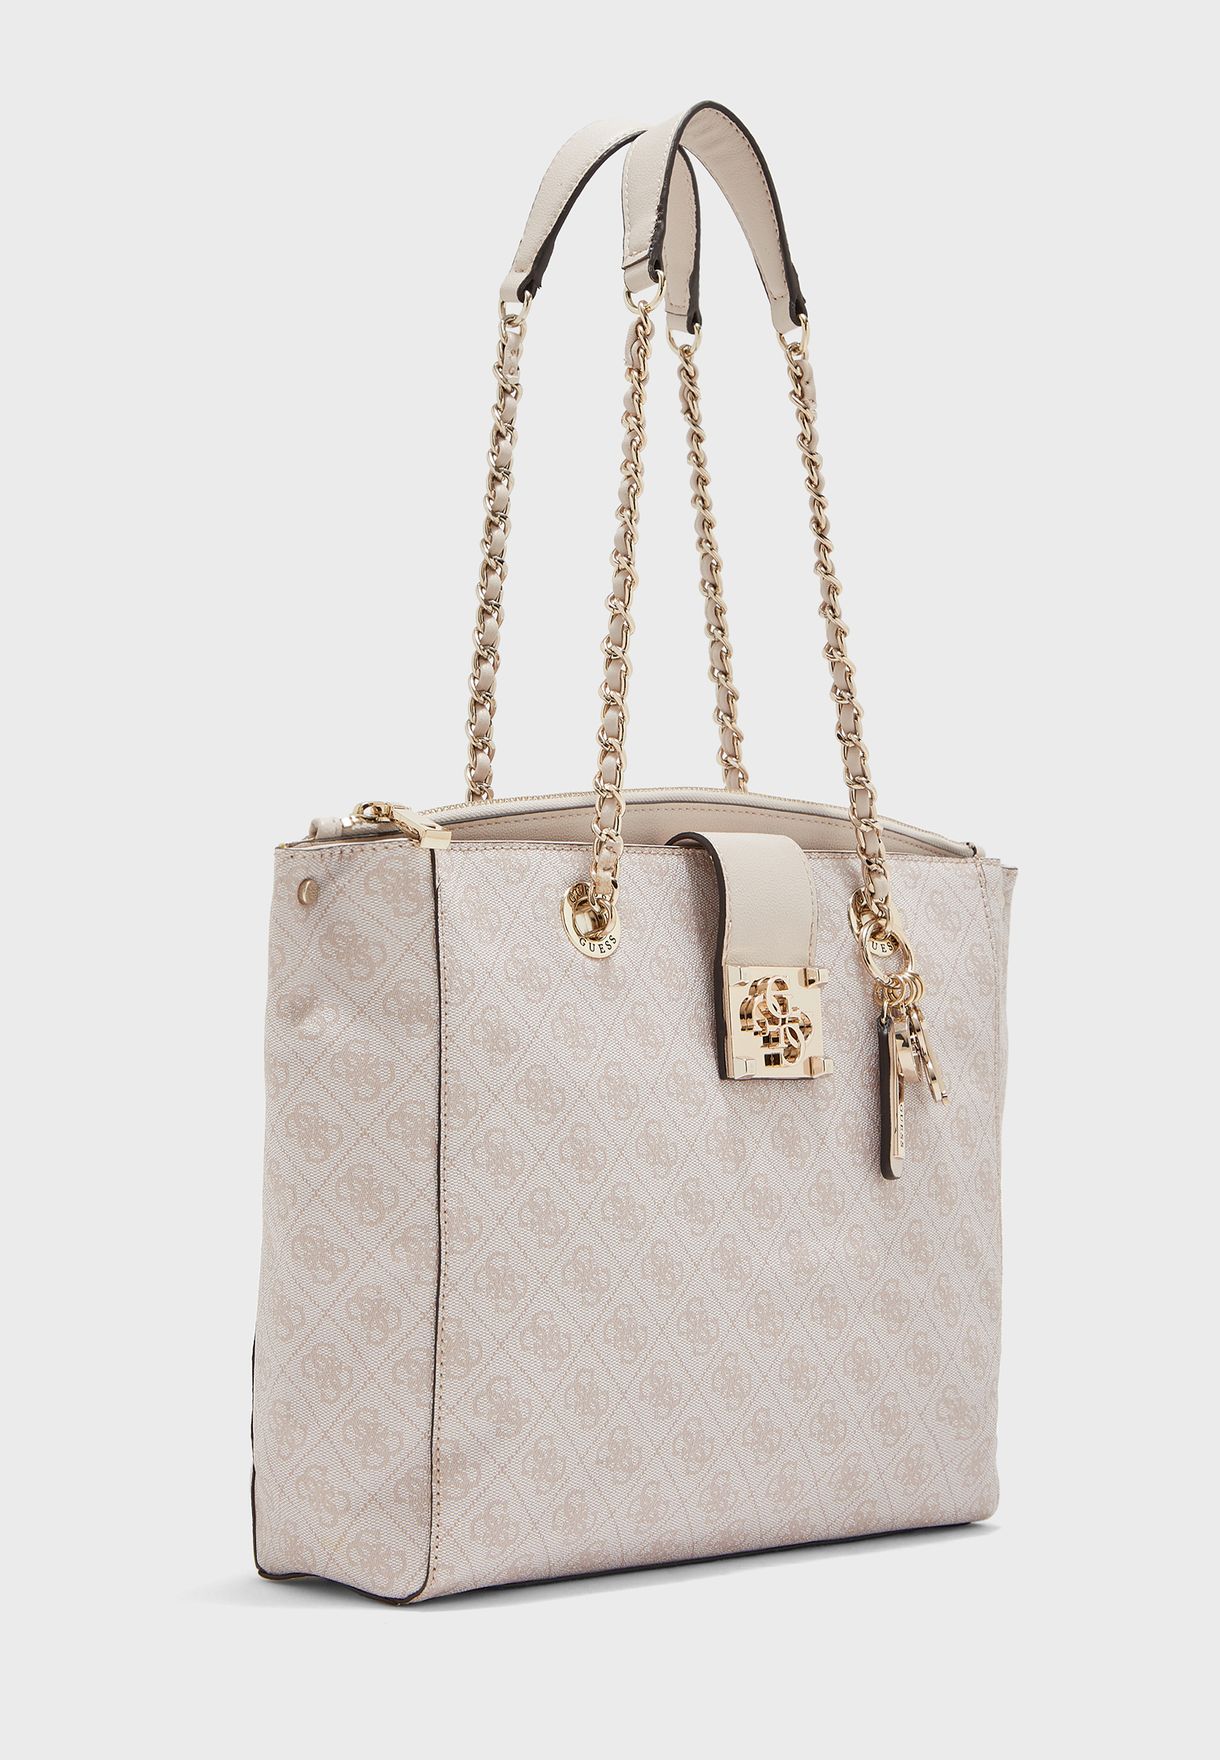 Buy Guess prints Logo City Girlfriend Carryall Tote for in MENA, Worldwide